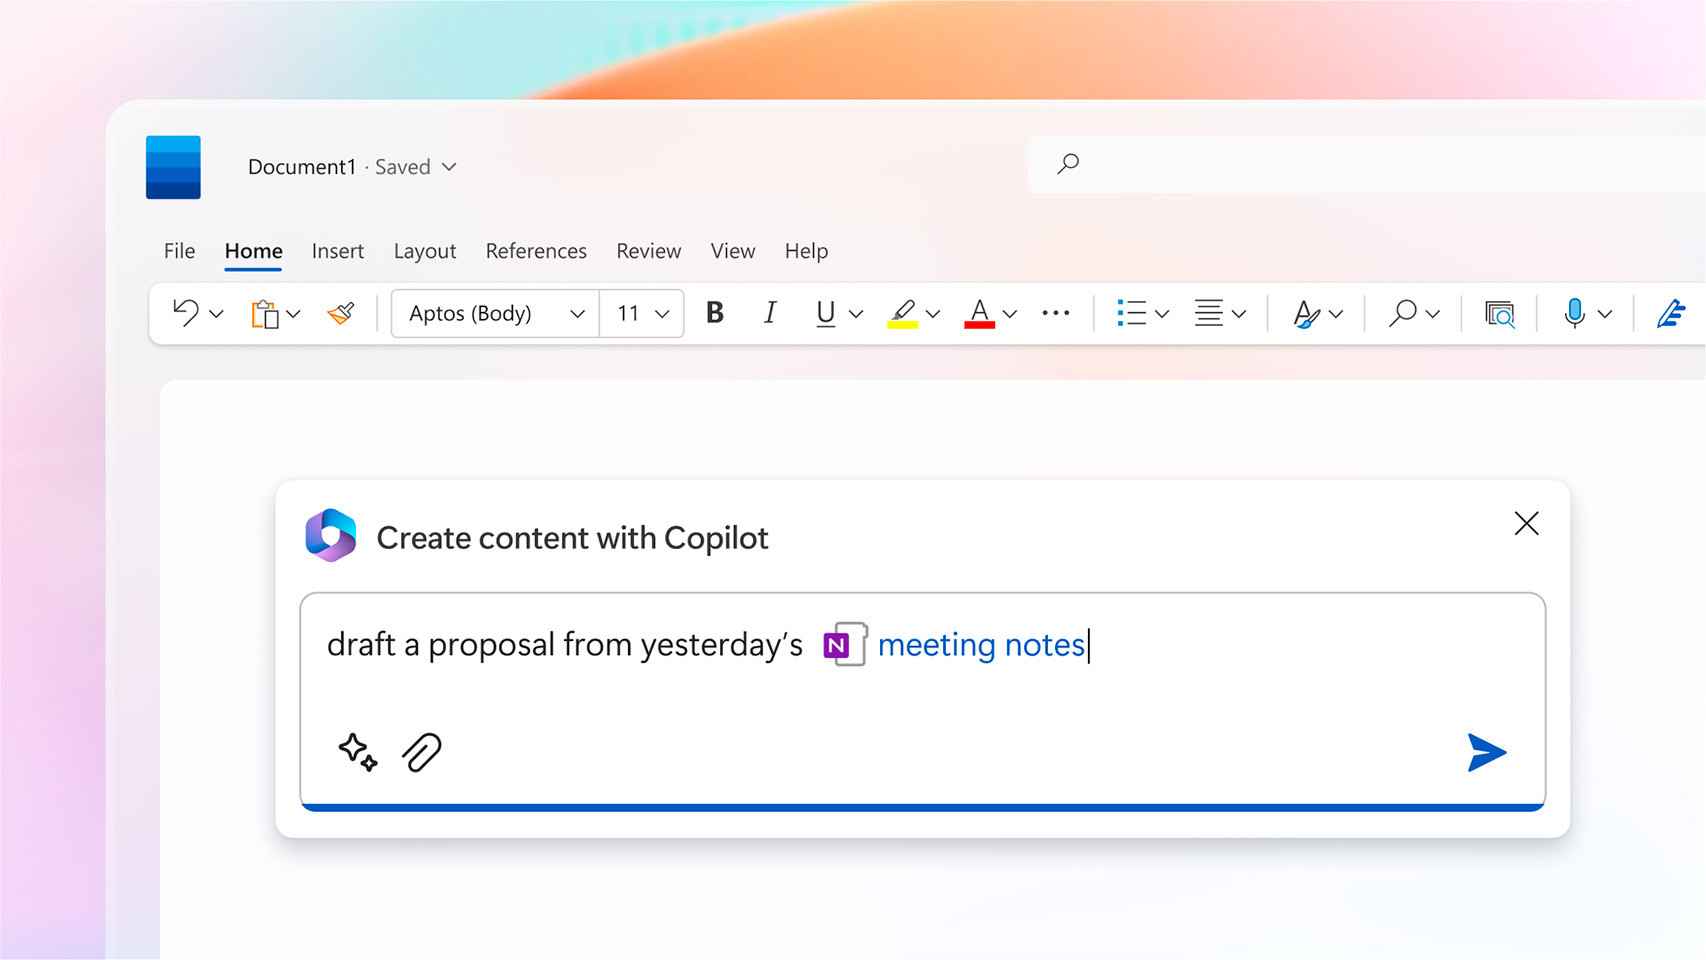 Generating content with Copilot in Microsoft 365